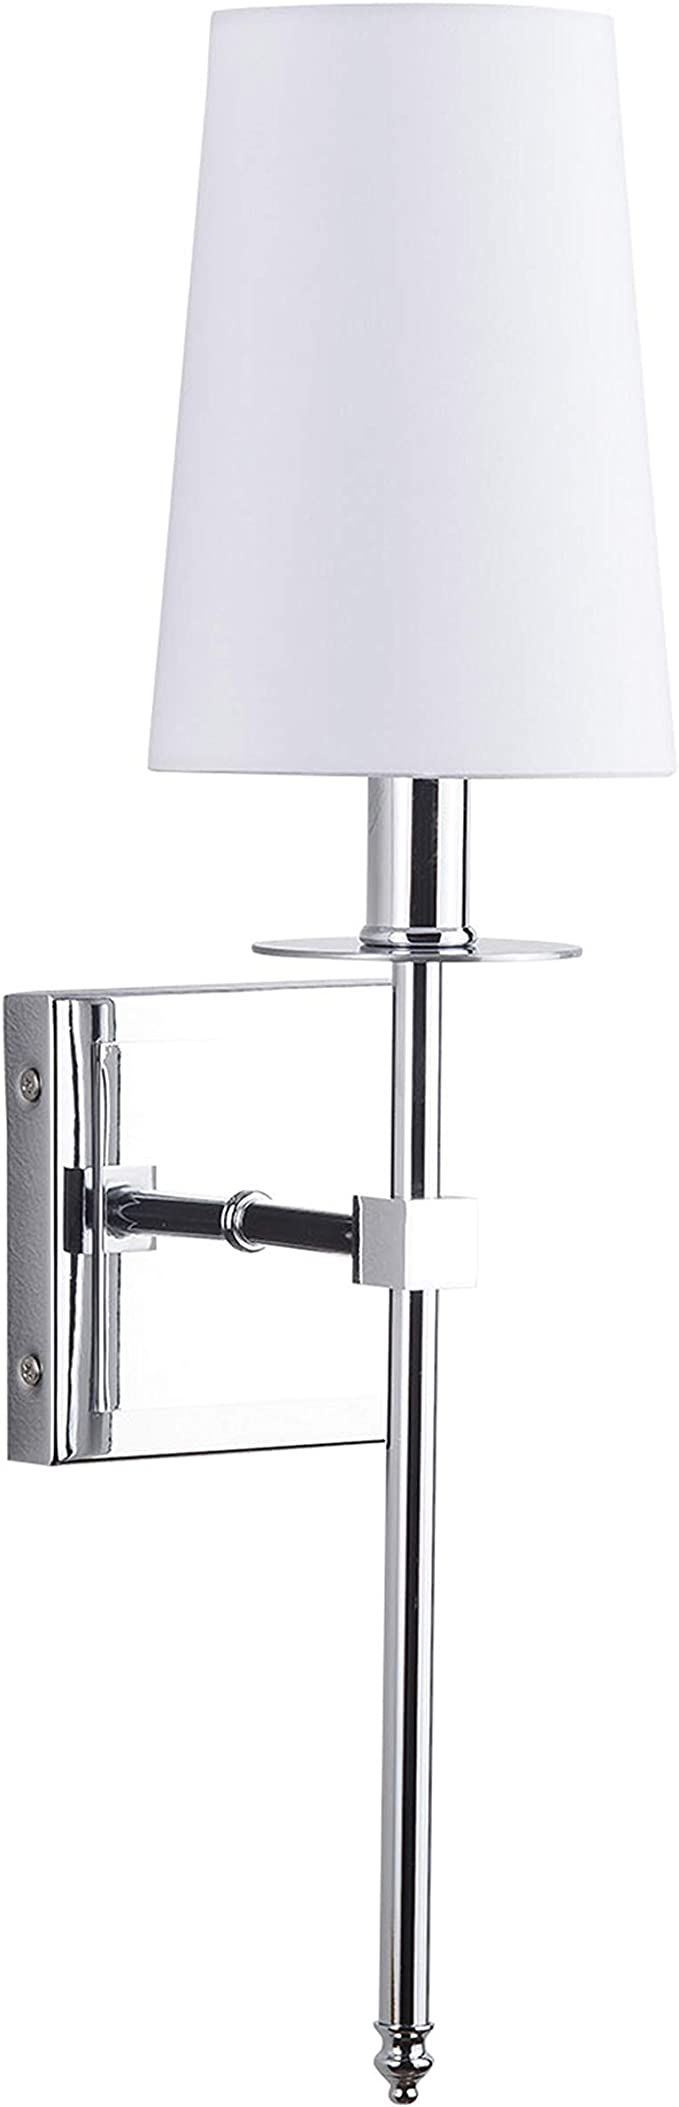 Linea di Liara Torcia Polished Chrome Wall Sconces with Shade Wallchiere Wall Lamp for Bedroom Ha... | Amazon (US)